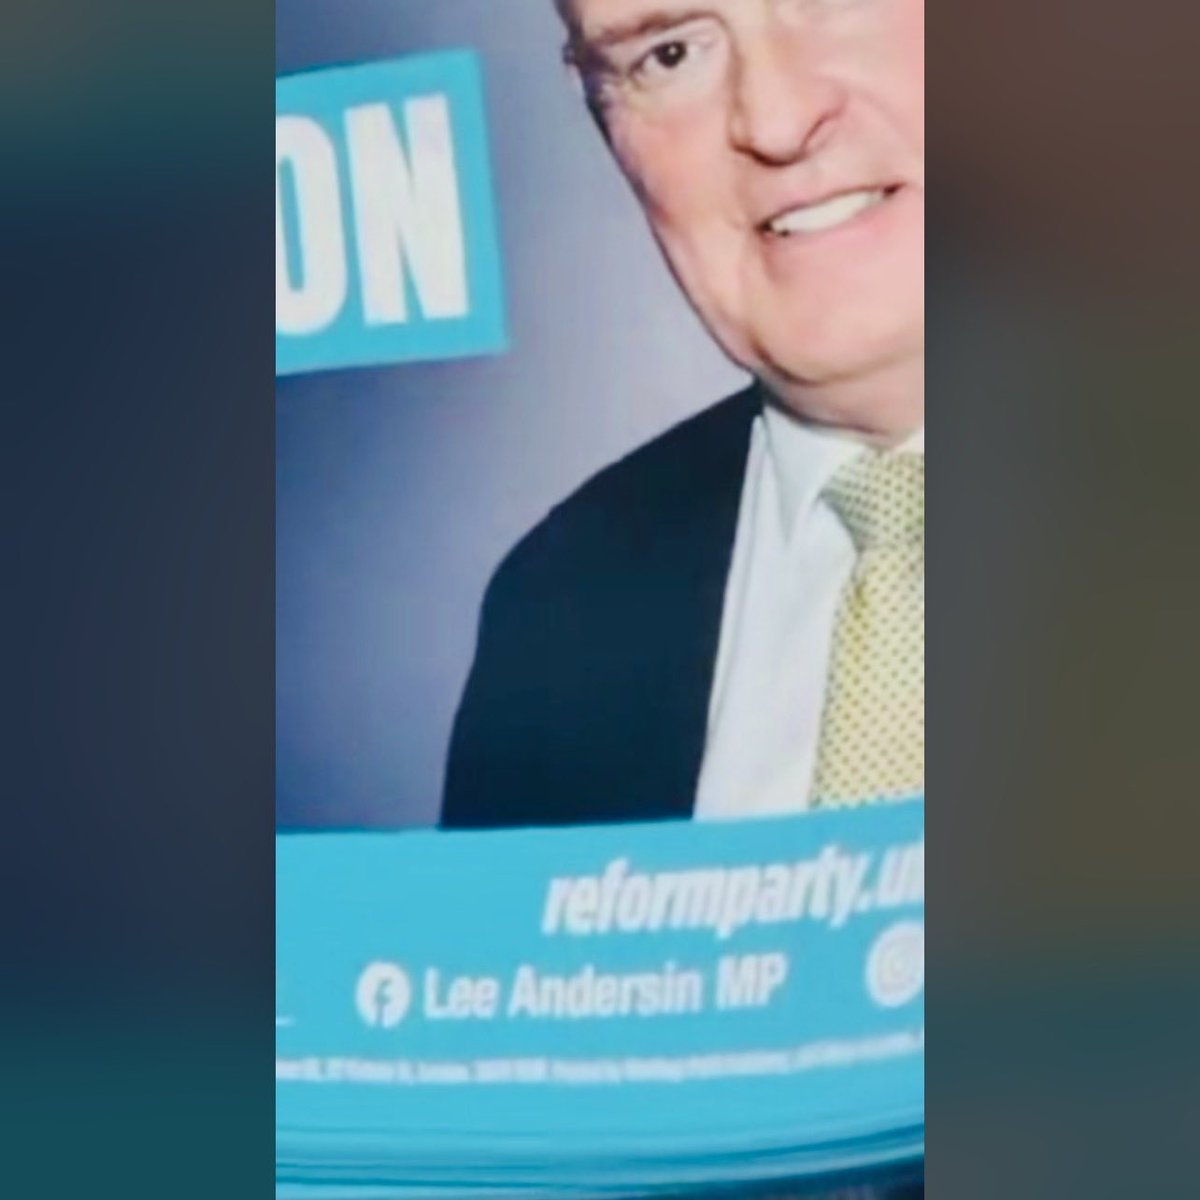 Lee Andersin MP #LeeAnderSIN According to the bad spelling on Lee Anderson's new Reform UK Ltd literature Maybe they're trying to tell us something?